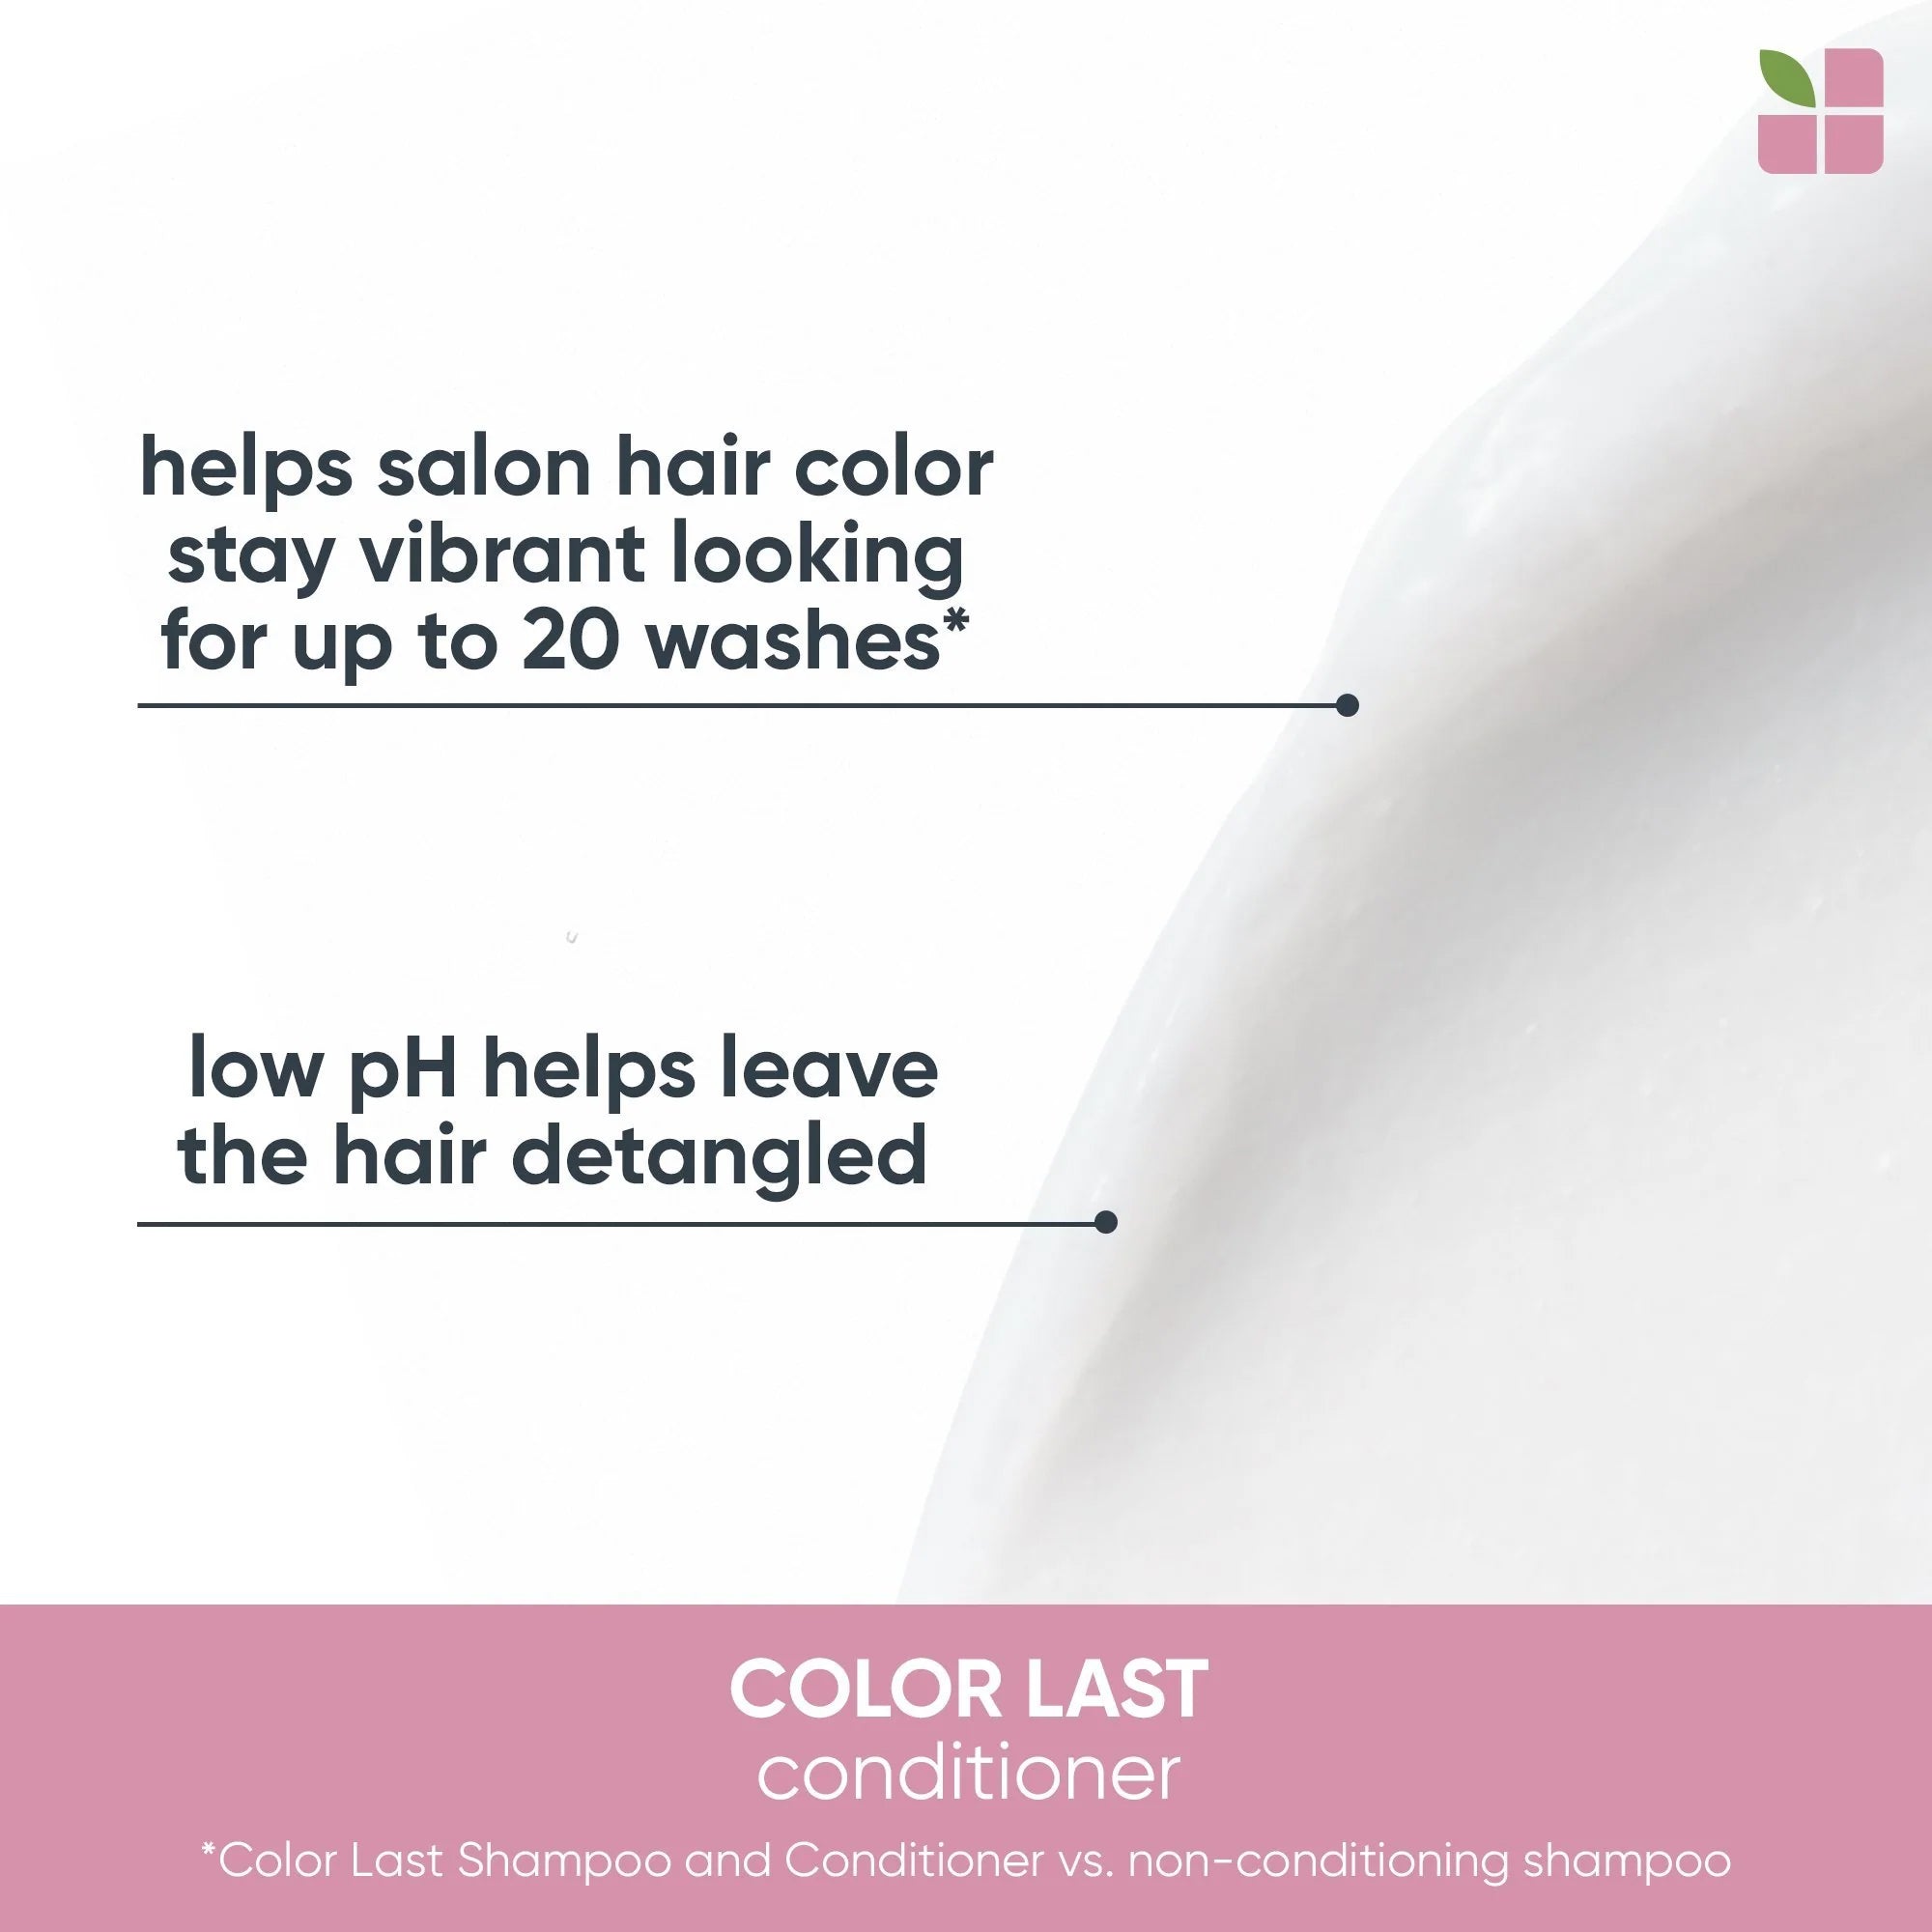 Biolage Colorlast conditioner texture stays vibrant color up to 20 washes